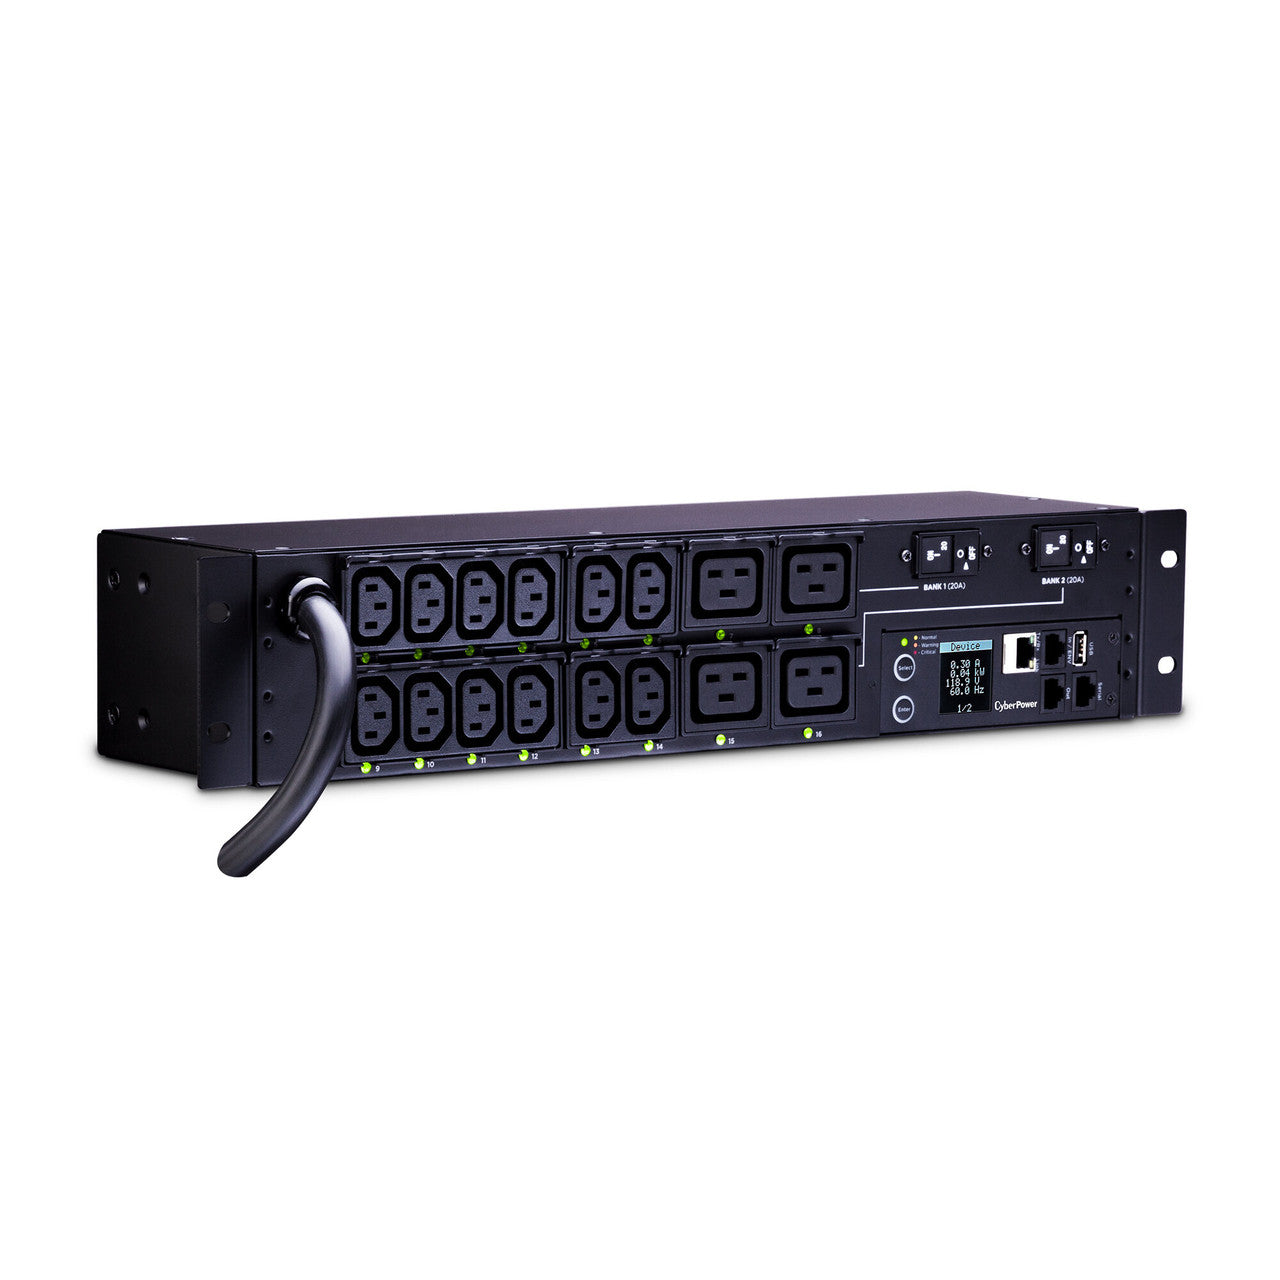 CyberPower PDU81008 SW MBO PDU 30A 208V Metered-by-Outlet Switched PDU 16 C13-C19 Outlets 12ft cord 3yr Warranty